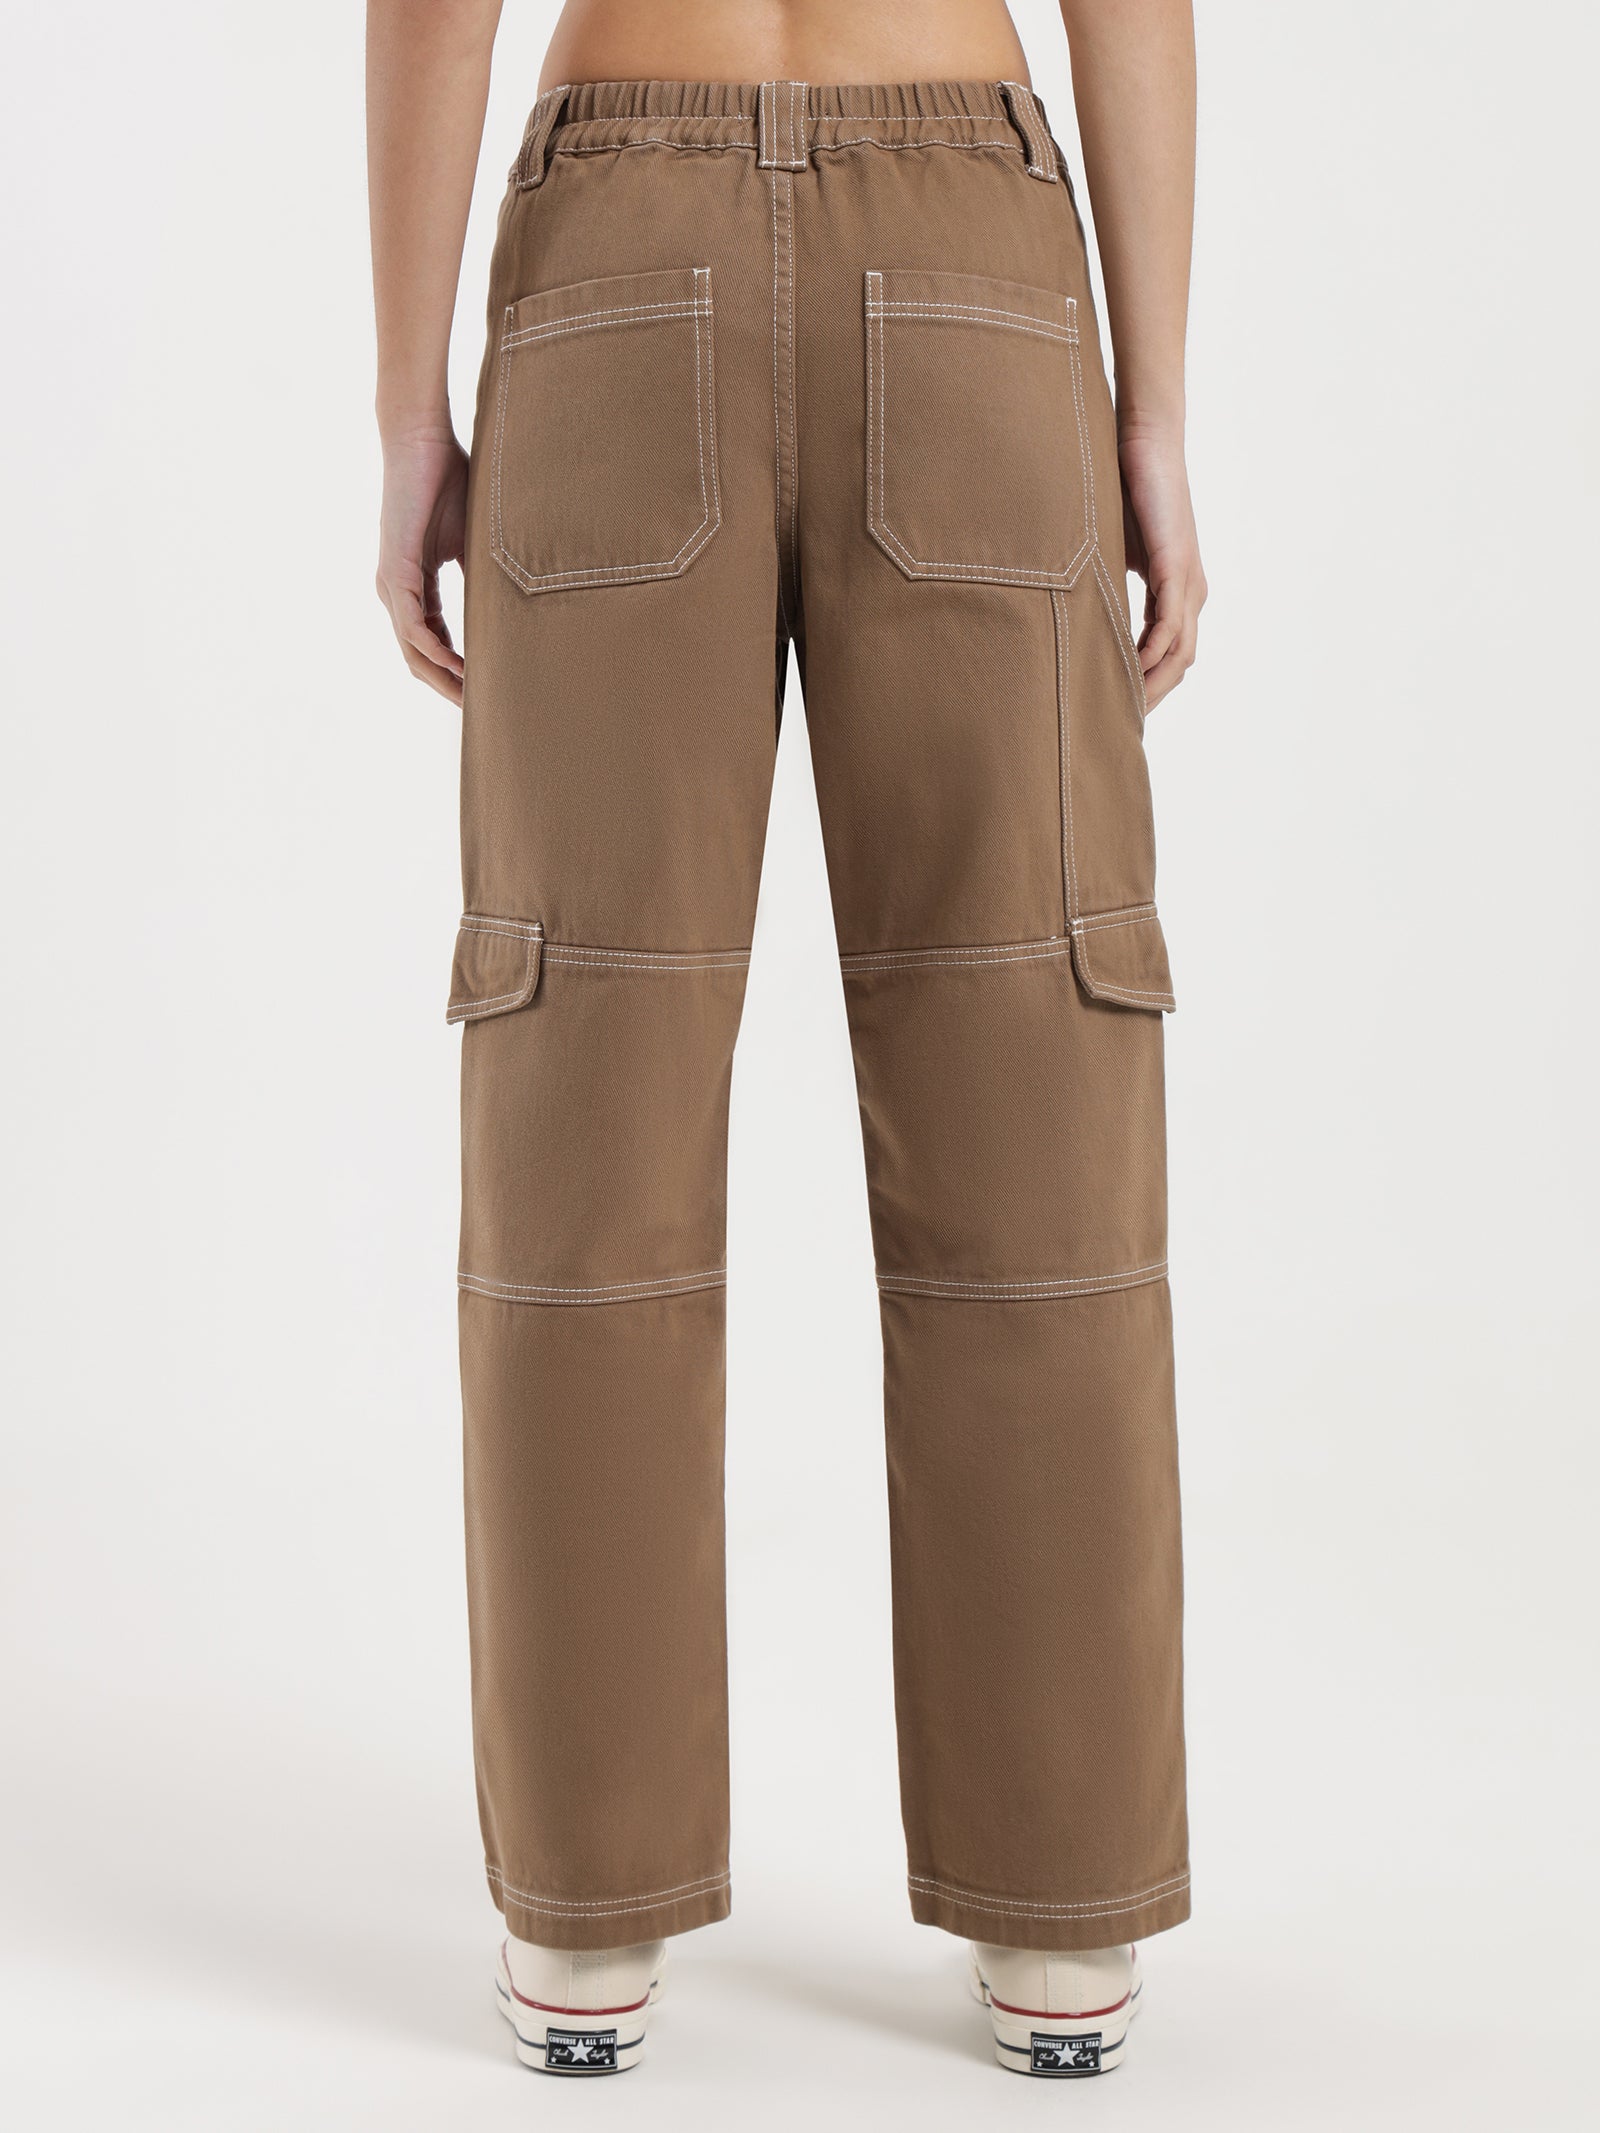 Multiple Pockets Elasticated Ankle Trousers  Black or Beige  Just 7